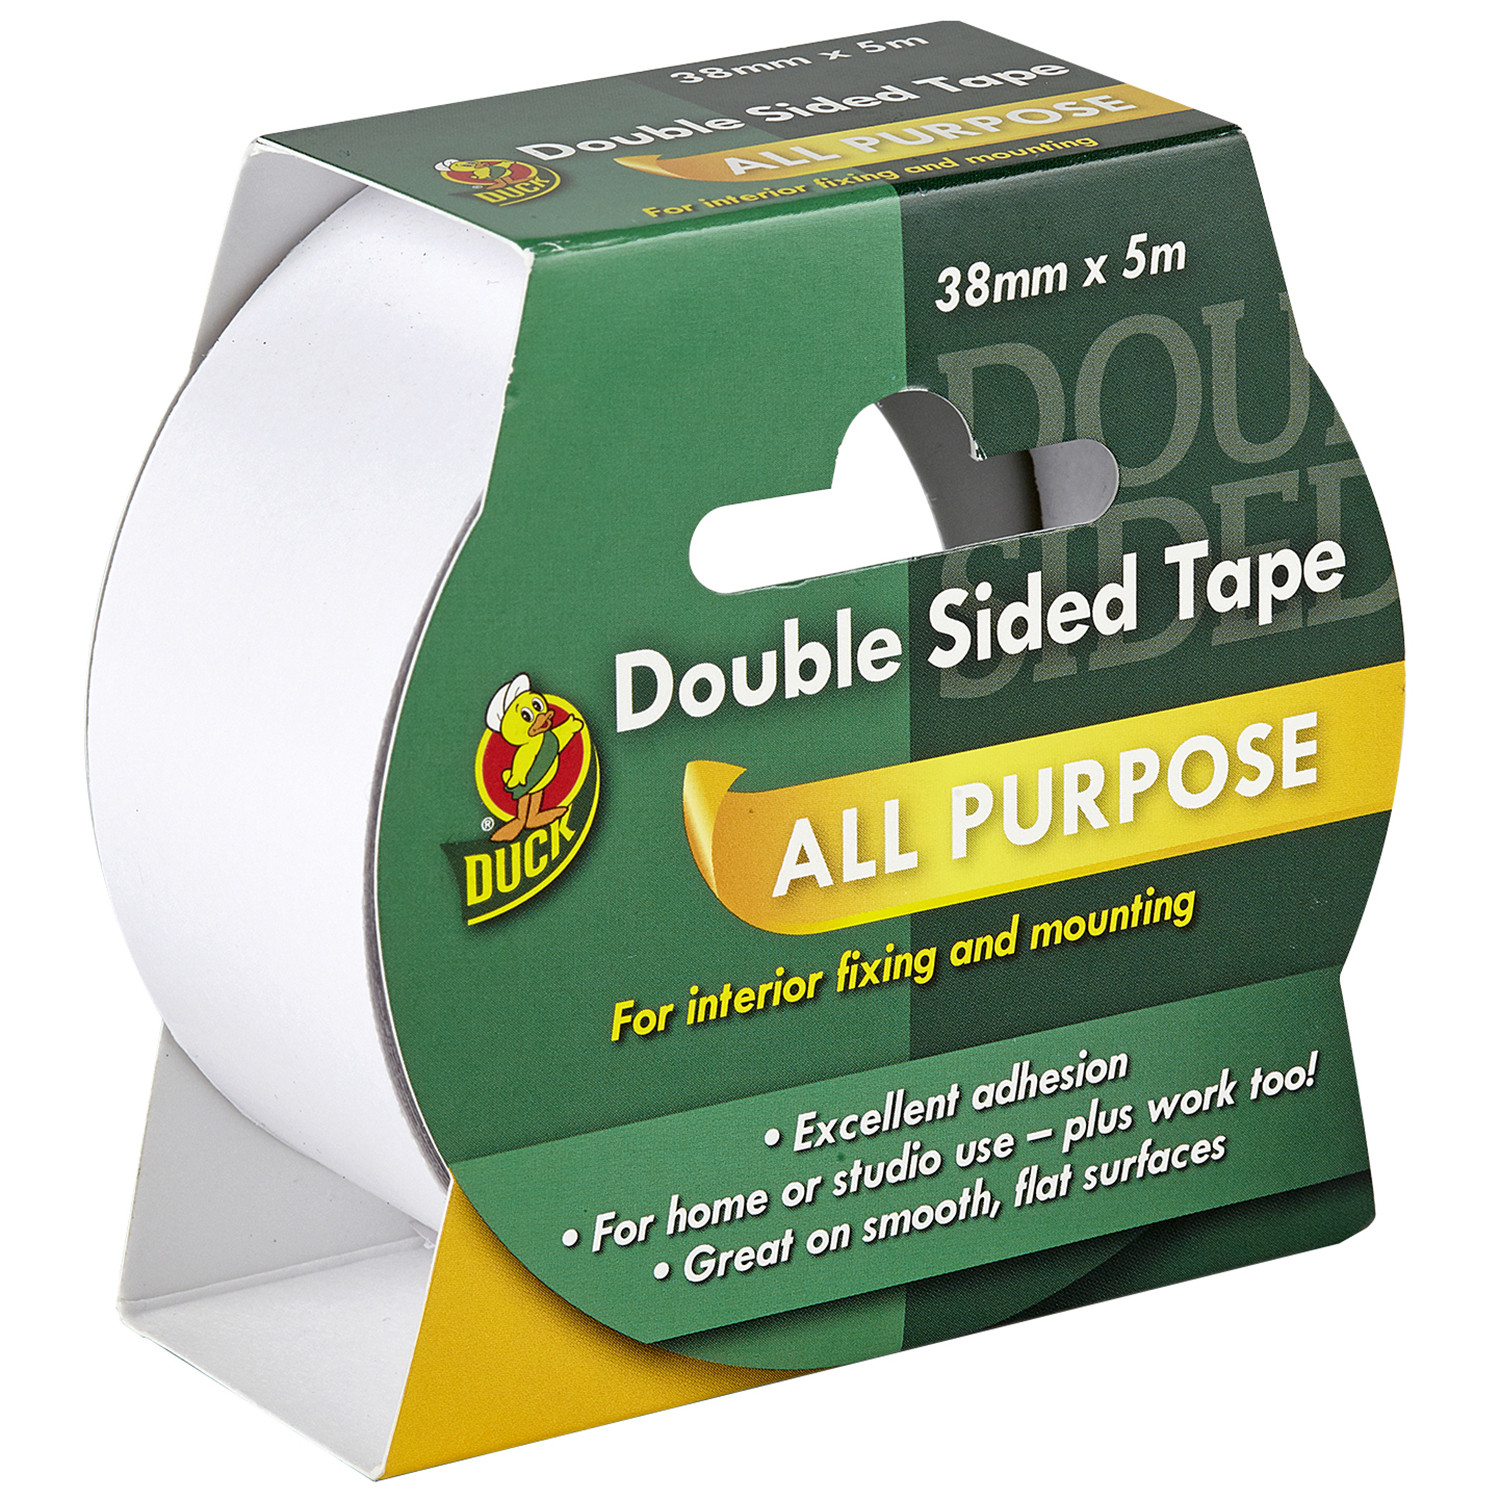 Duck 38mm x 5m Double Sided Tape Image 2